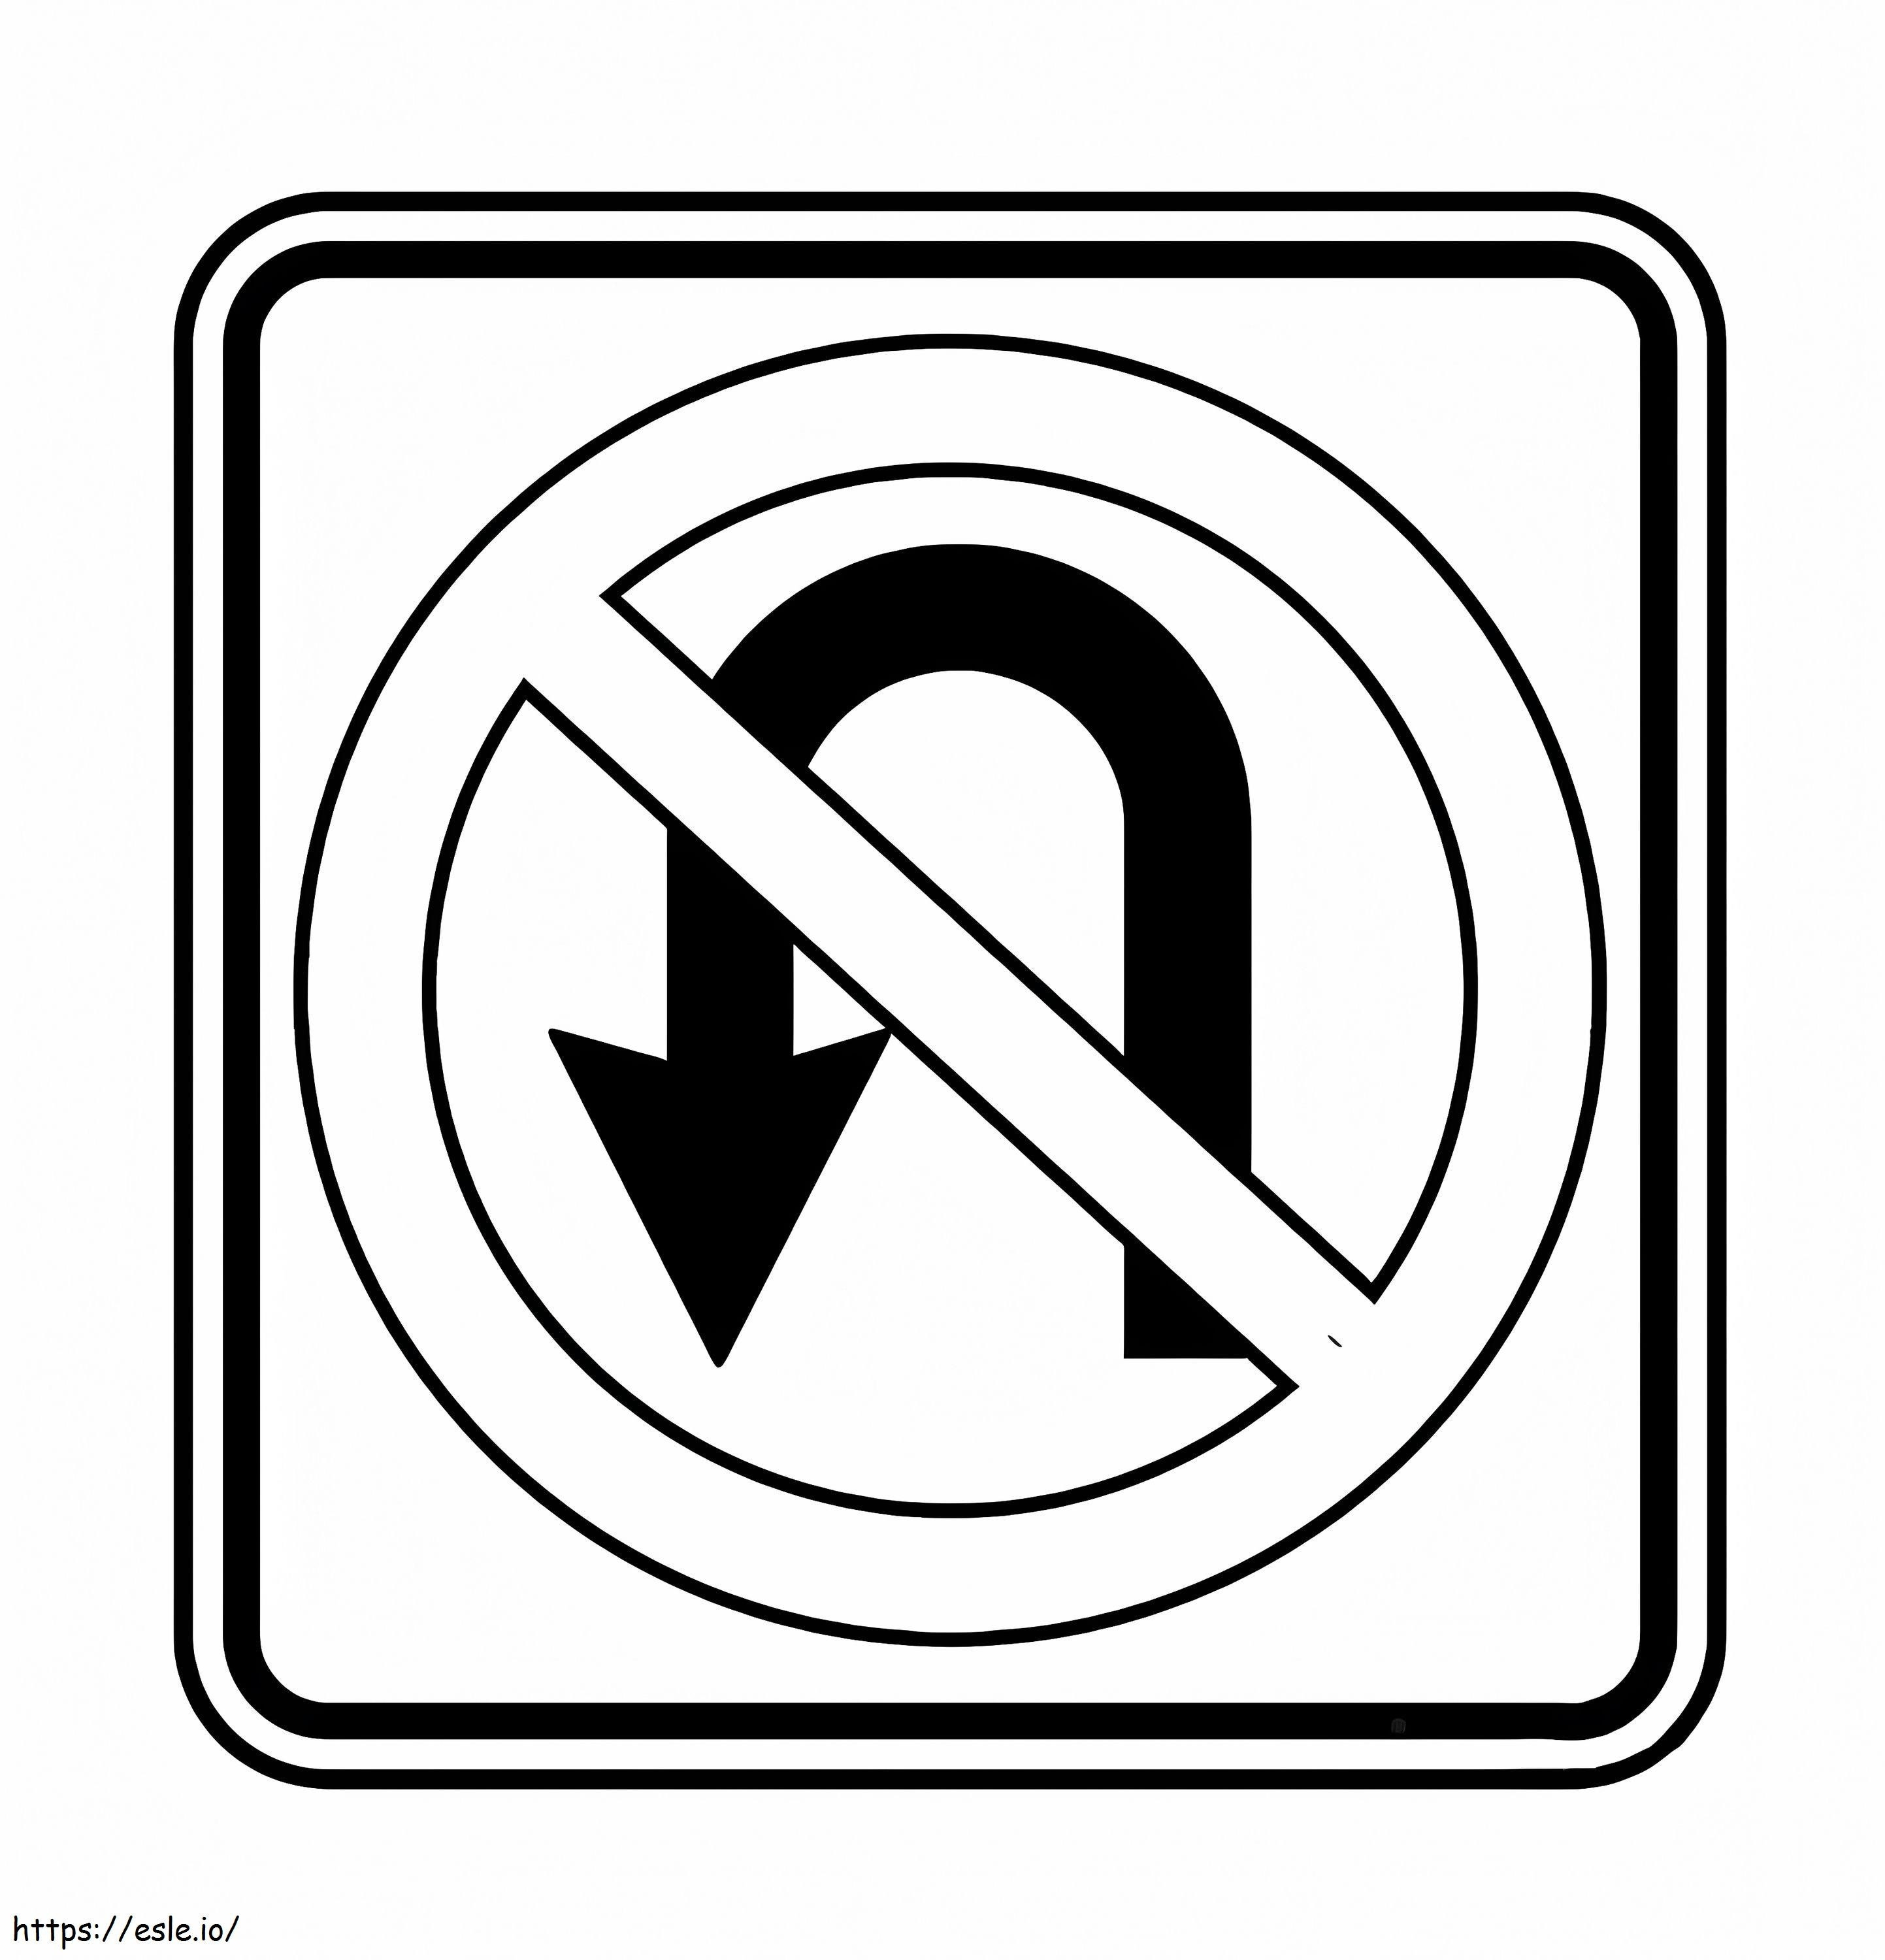 No U Turn Traffic Sign Colorig Page coloring page